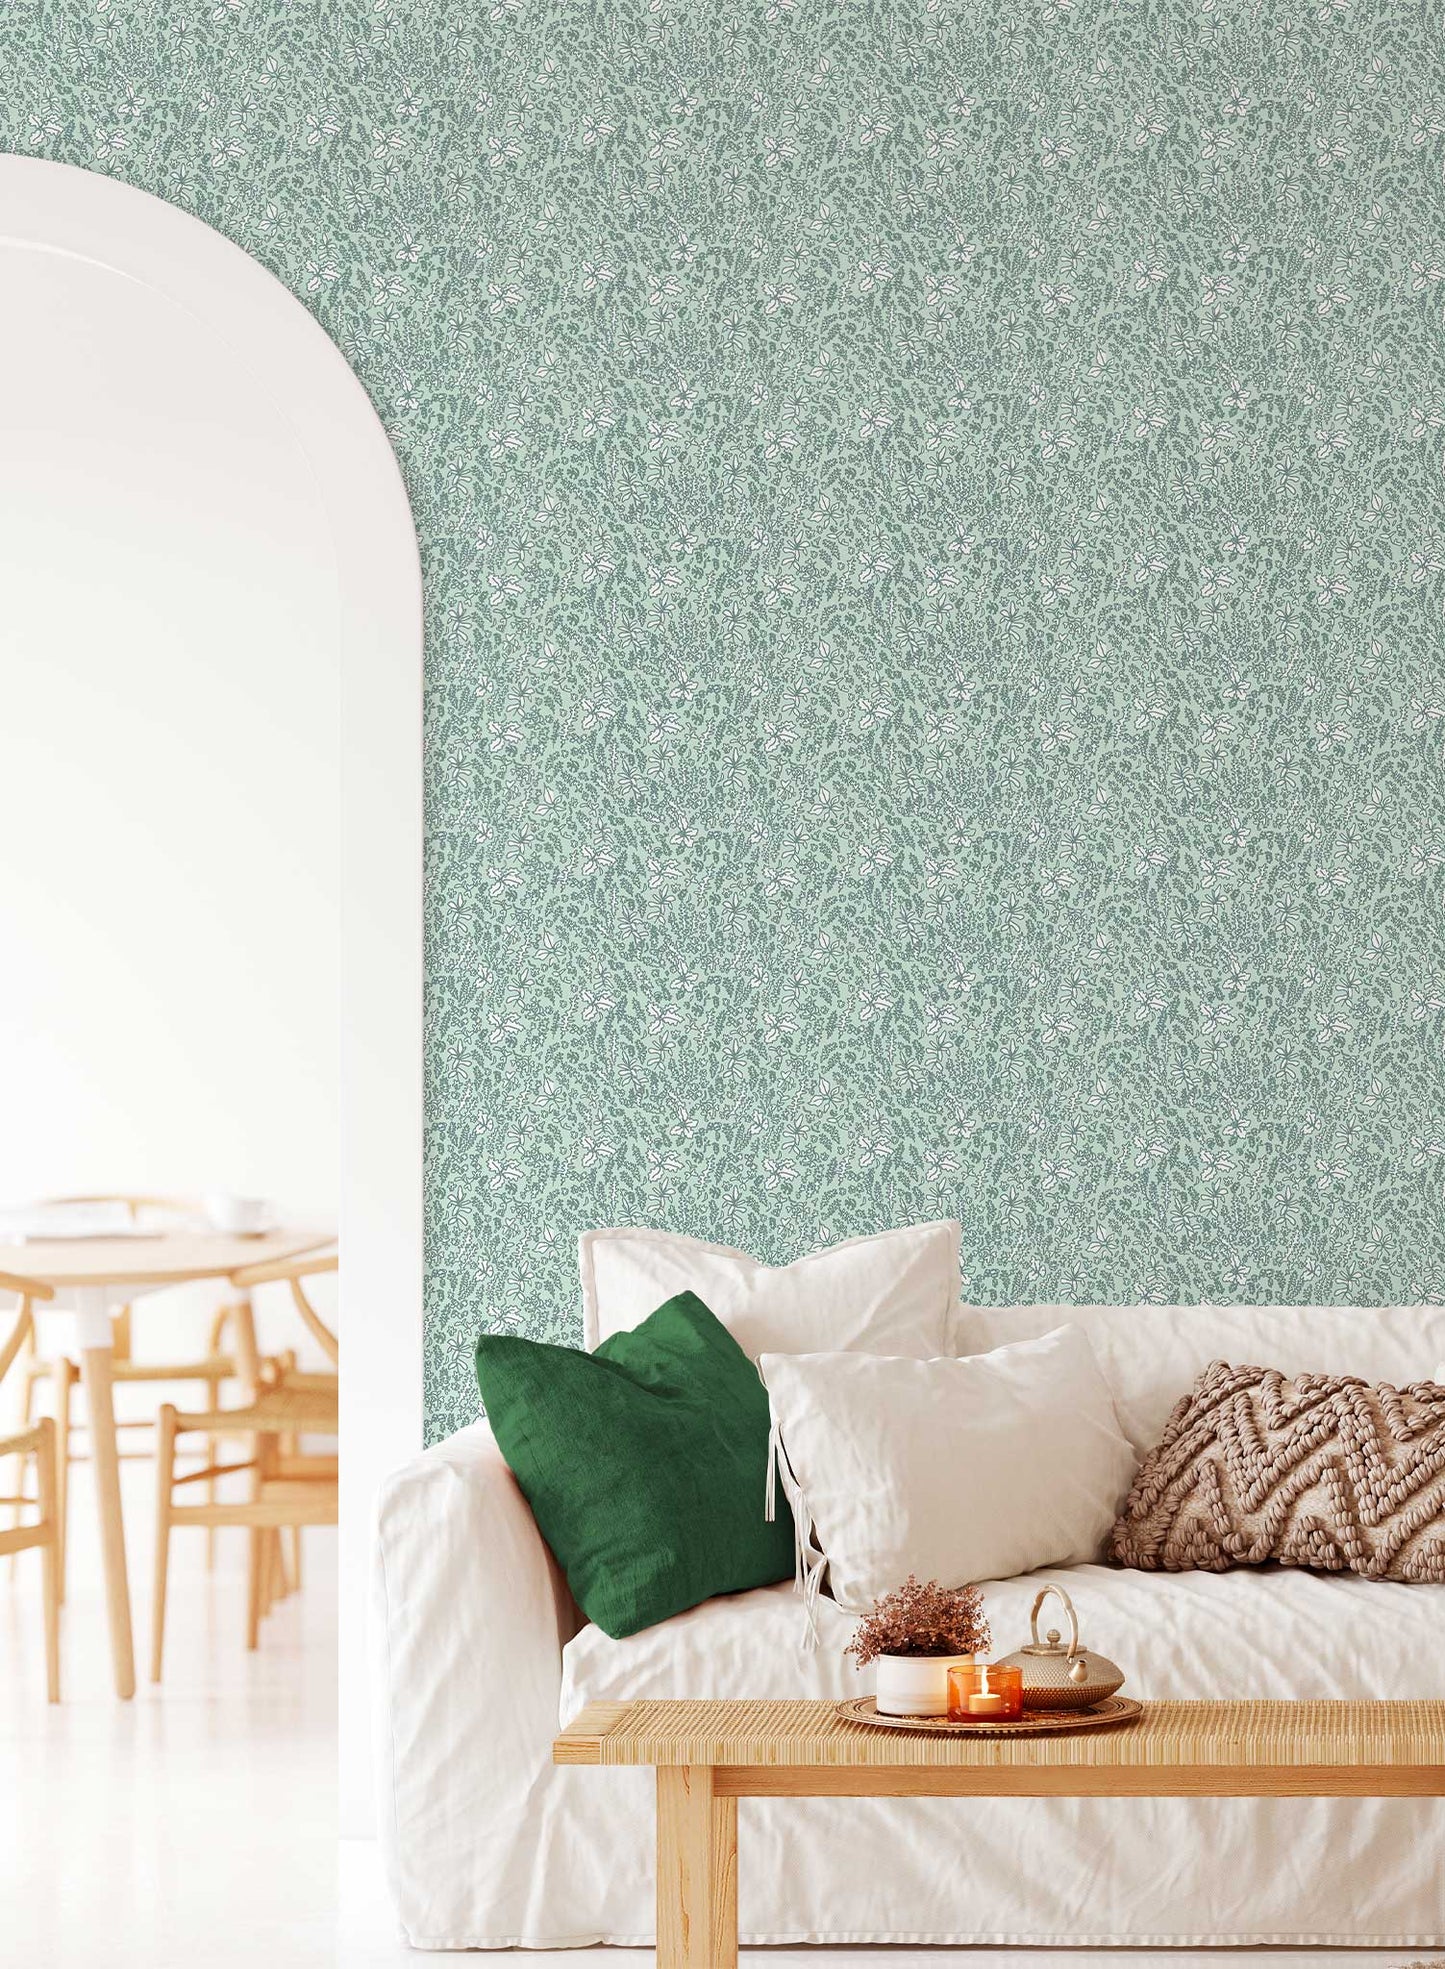 Mossy is a minimalist wallpaper by Opposite Wall of a pattern reminiscent of a moss mat in nature.